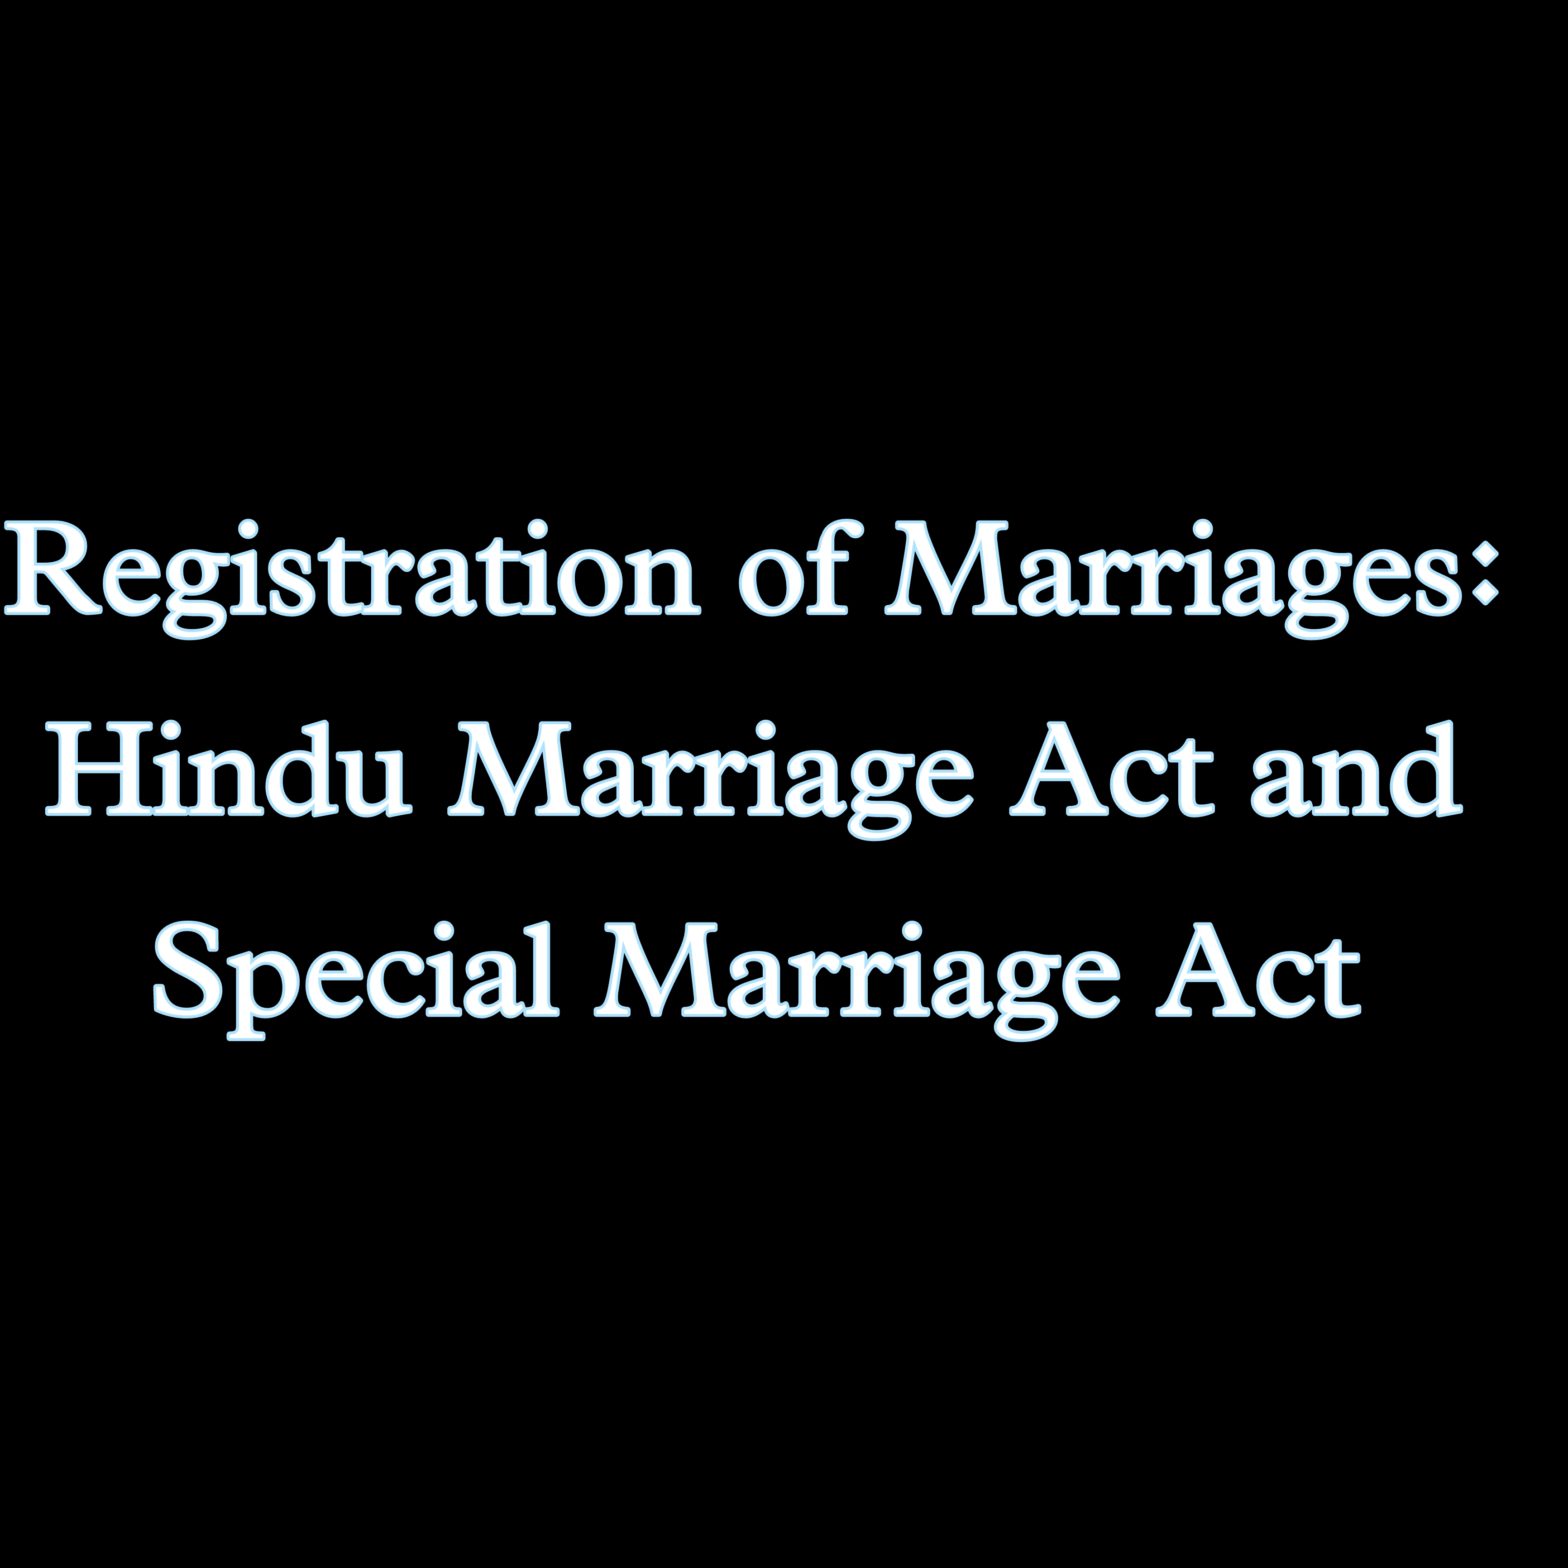 Registration of Marriages: Hindu Marriage Act and Special Marriage Act